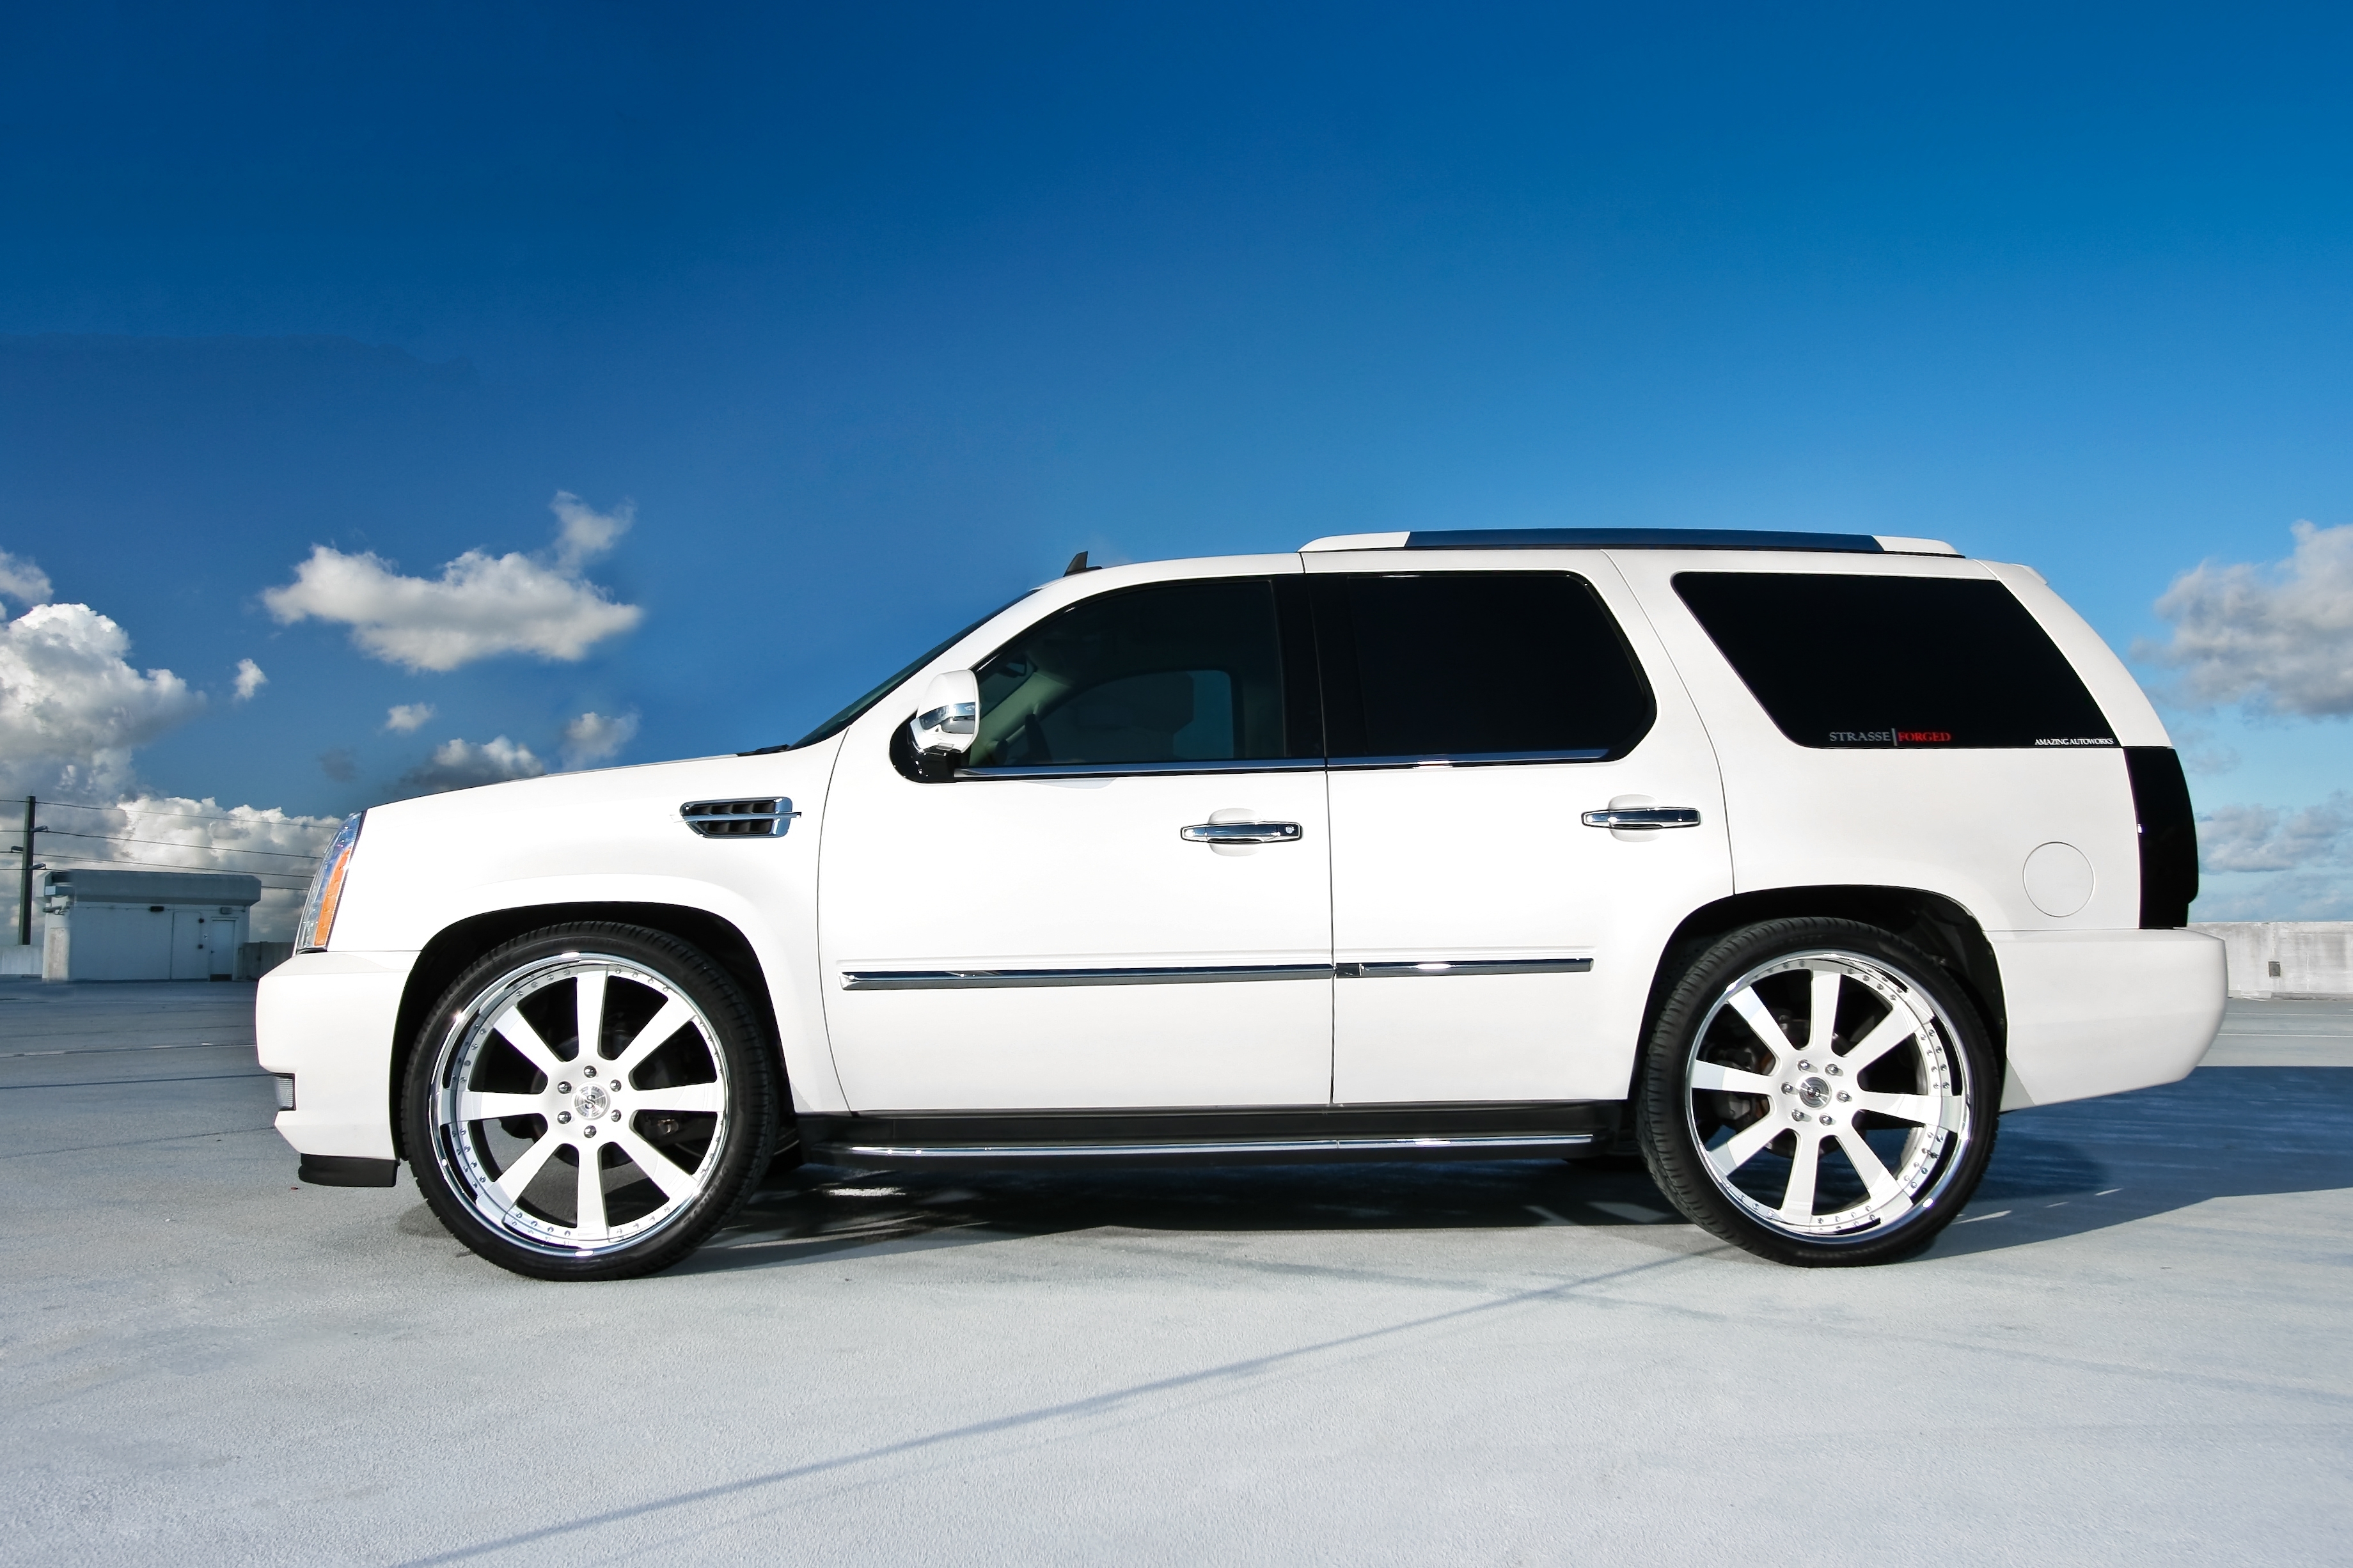 cadillac, cars, white, roof, parking, profile, disks, drives, wheels, escalade